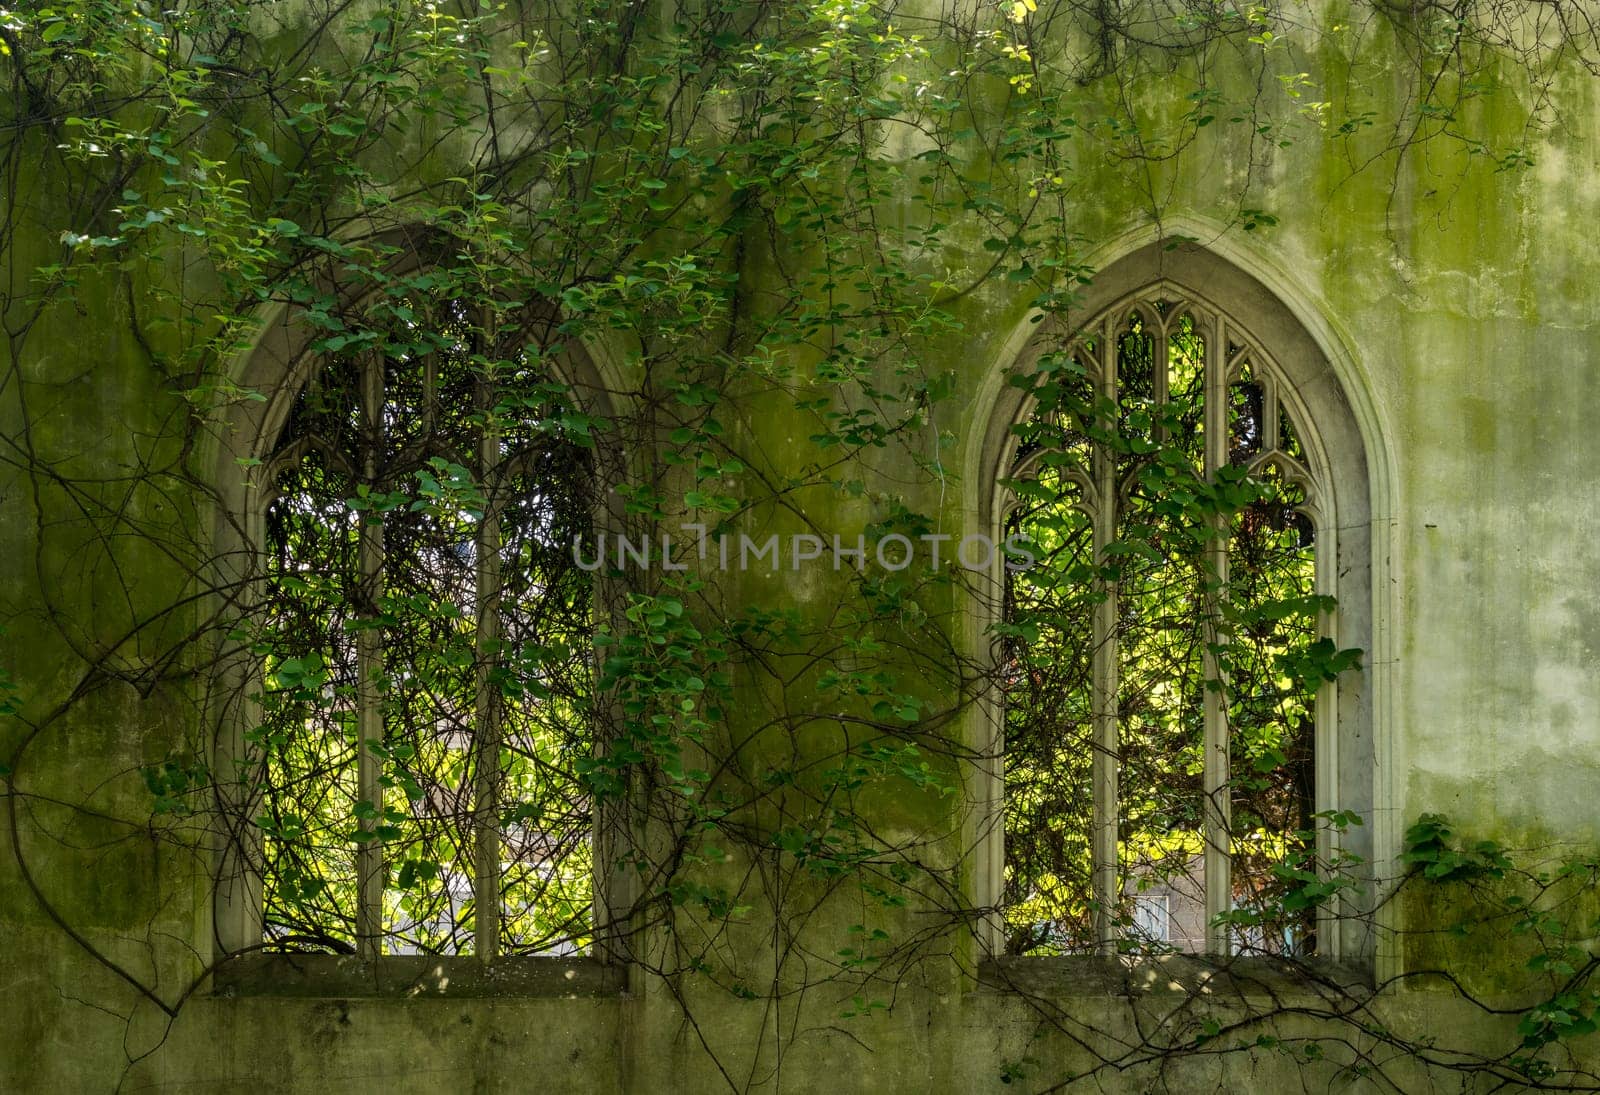 Creeping plants over the empty windows of St Dunstan church by steheap